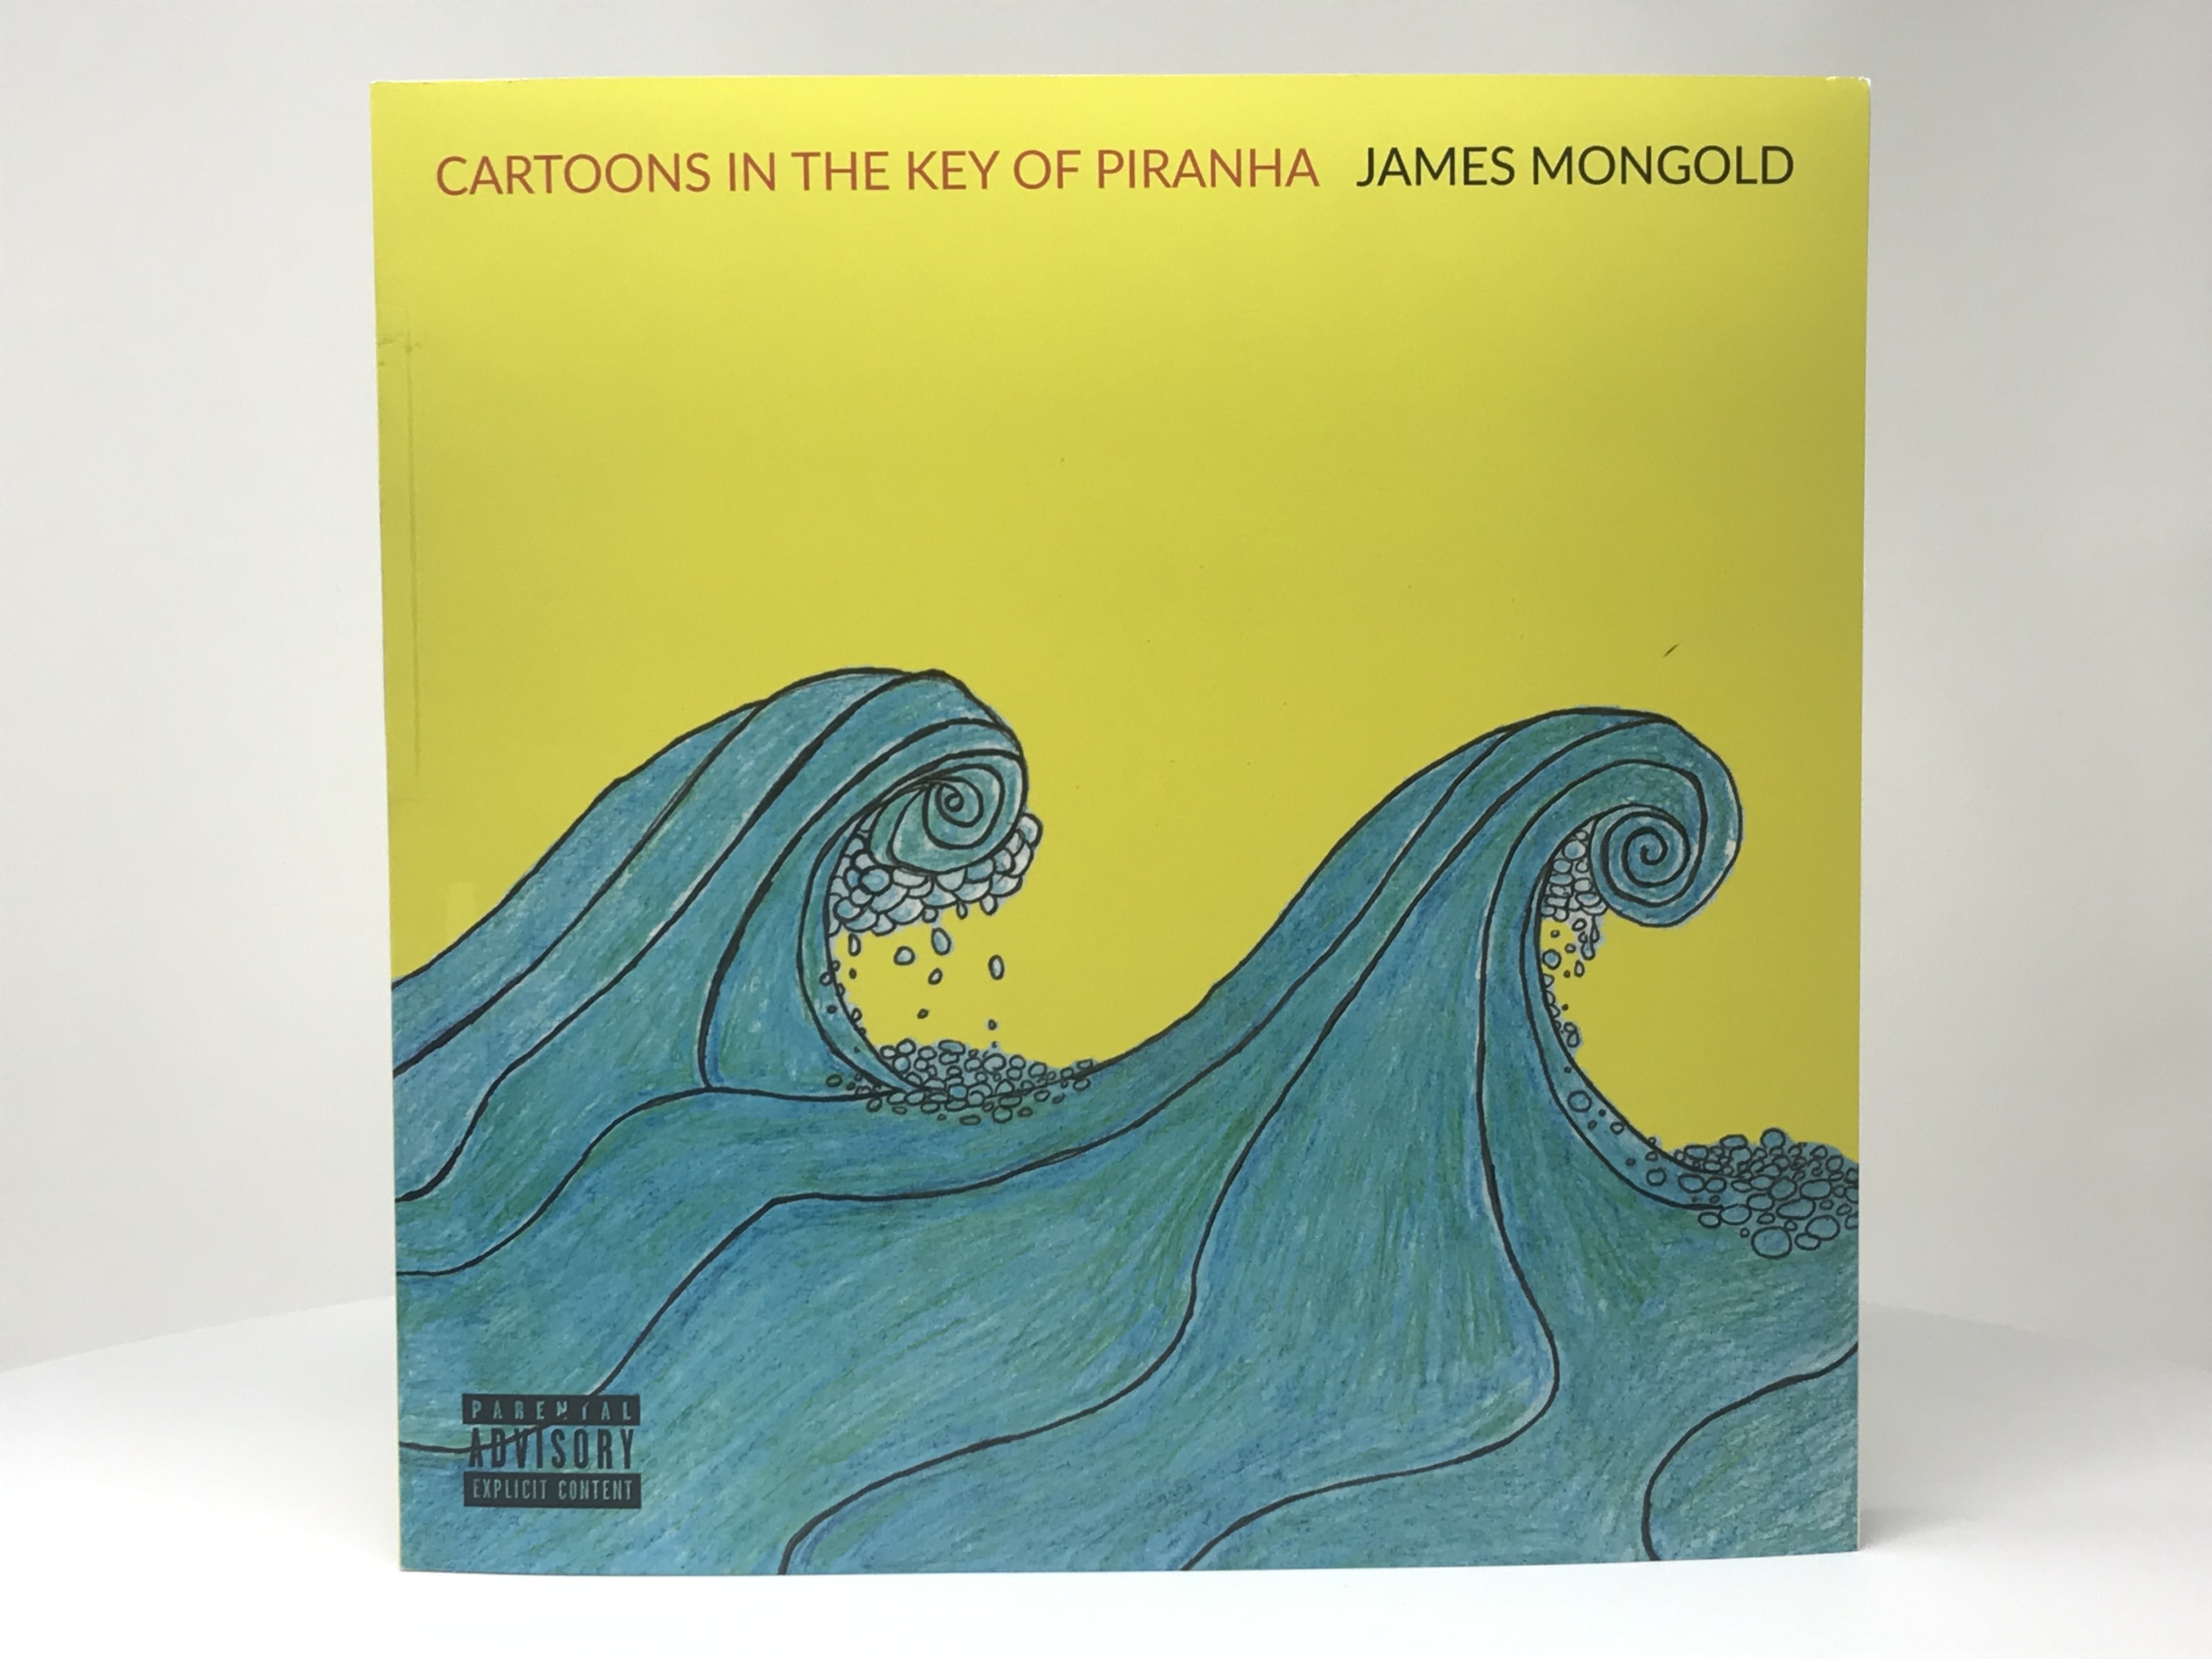 "Cartoons in the Key of Piranha" by James Mongold book cover